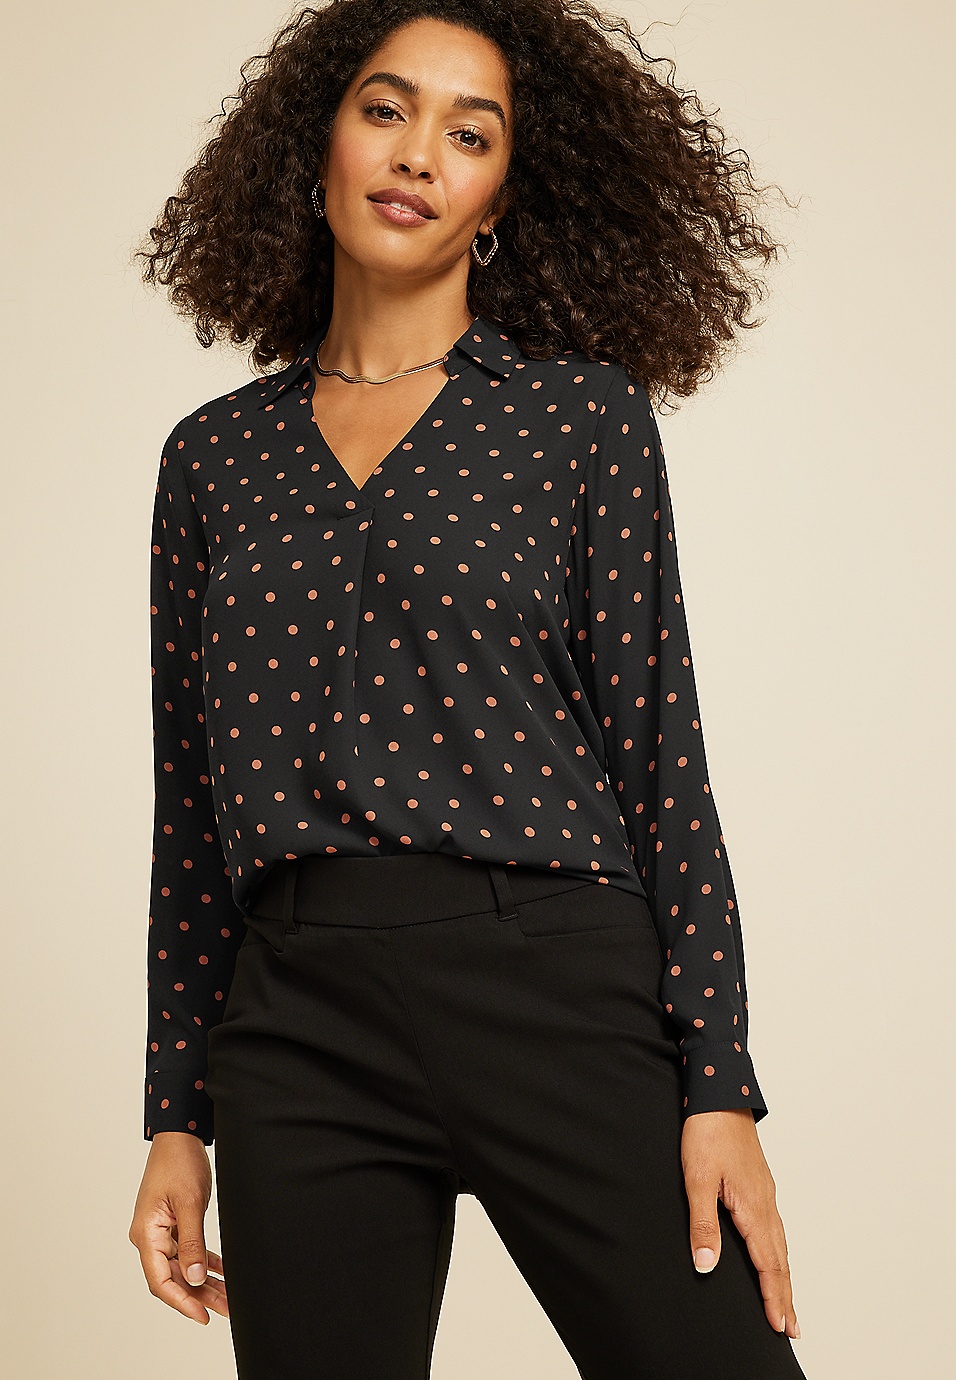 Maurices Women's Atwood Pleated Polka Dot Blouse